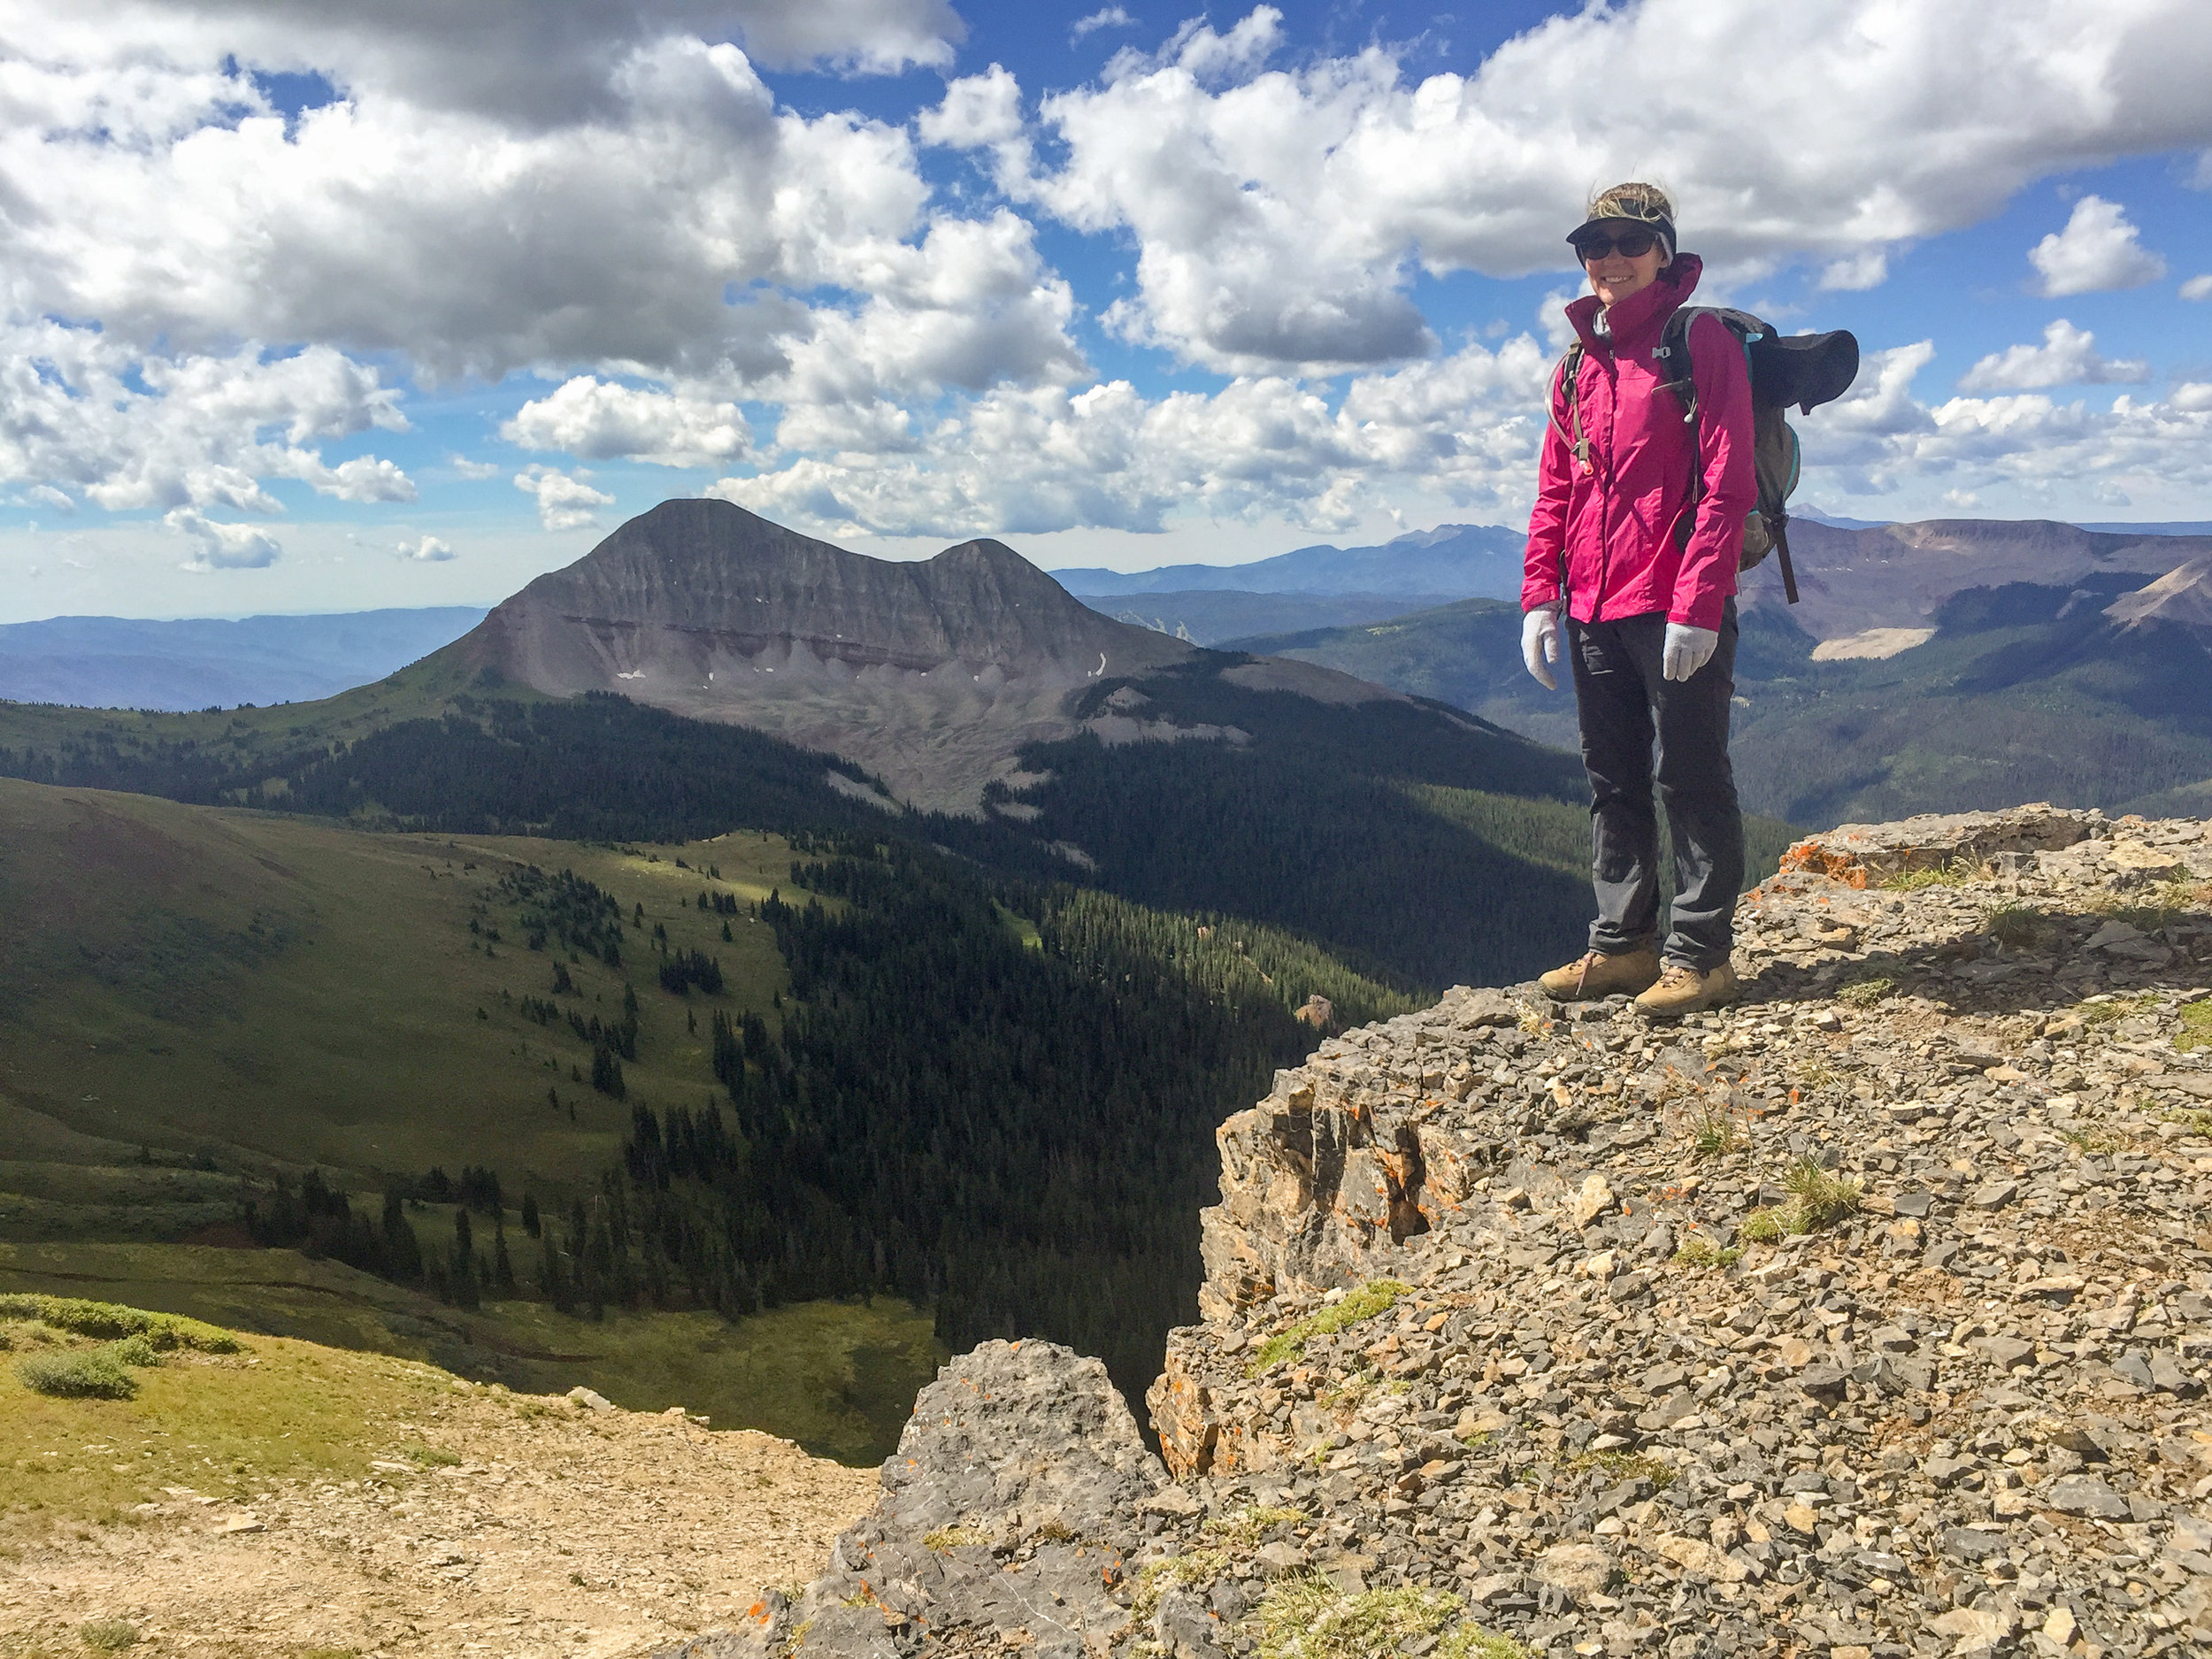 Jane Marie on Jura Knob with Engineer Mountain in the background